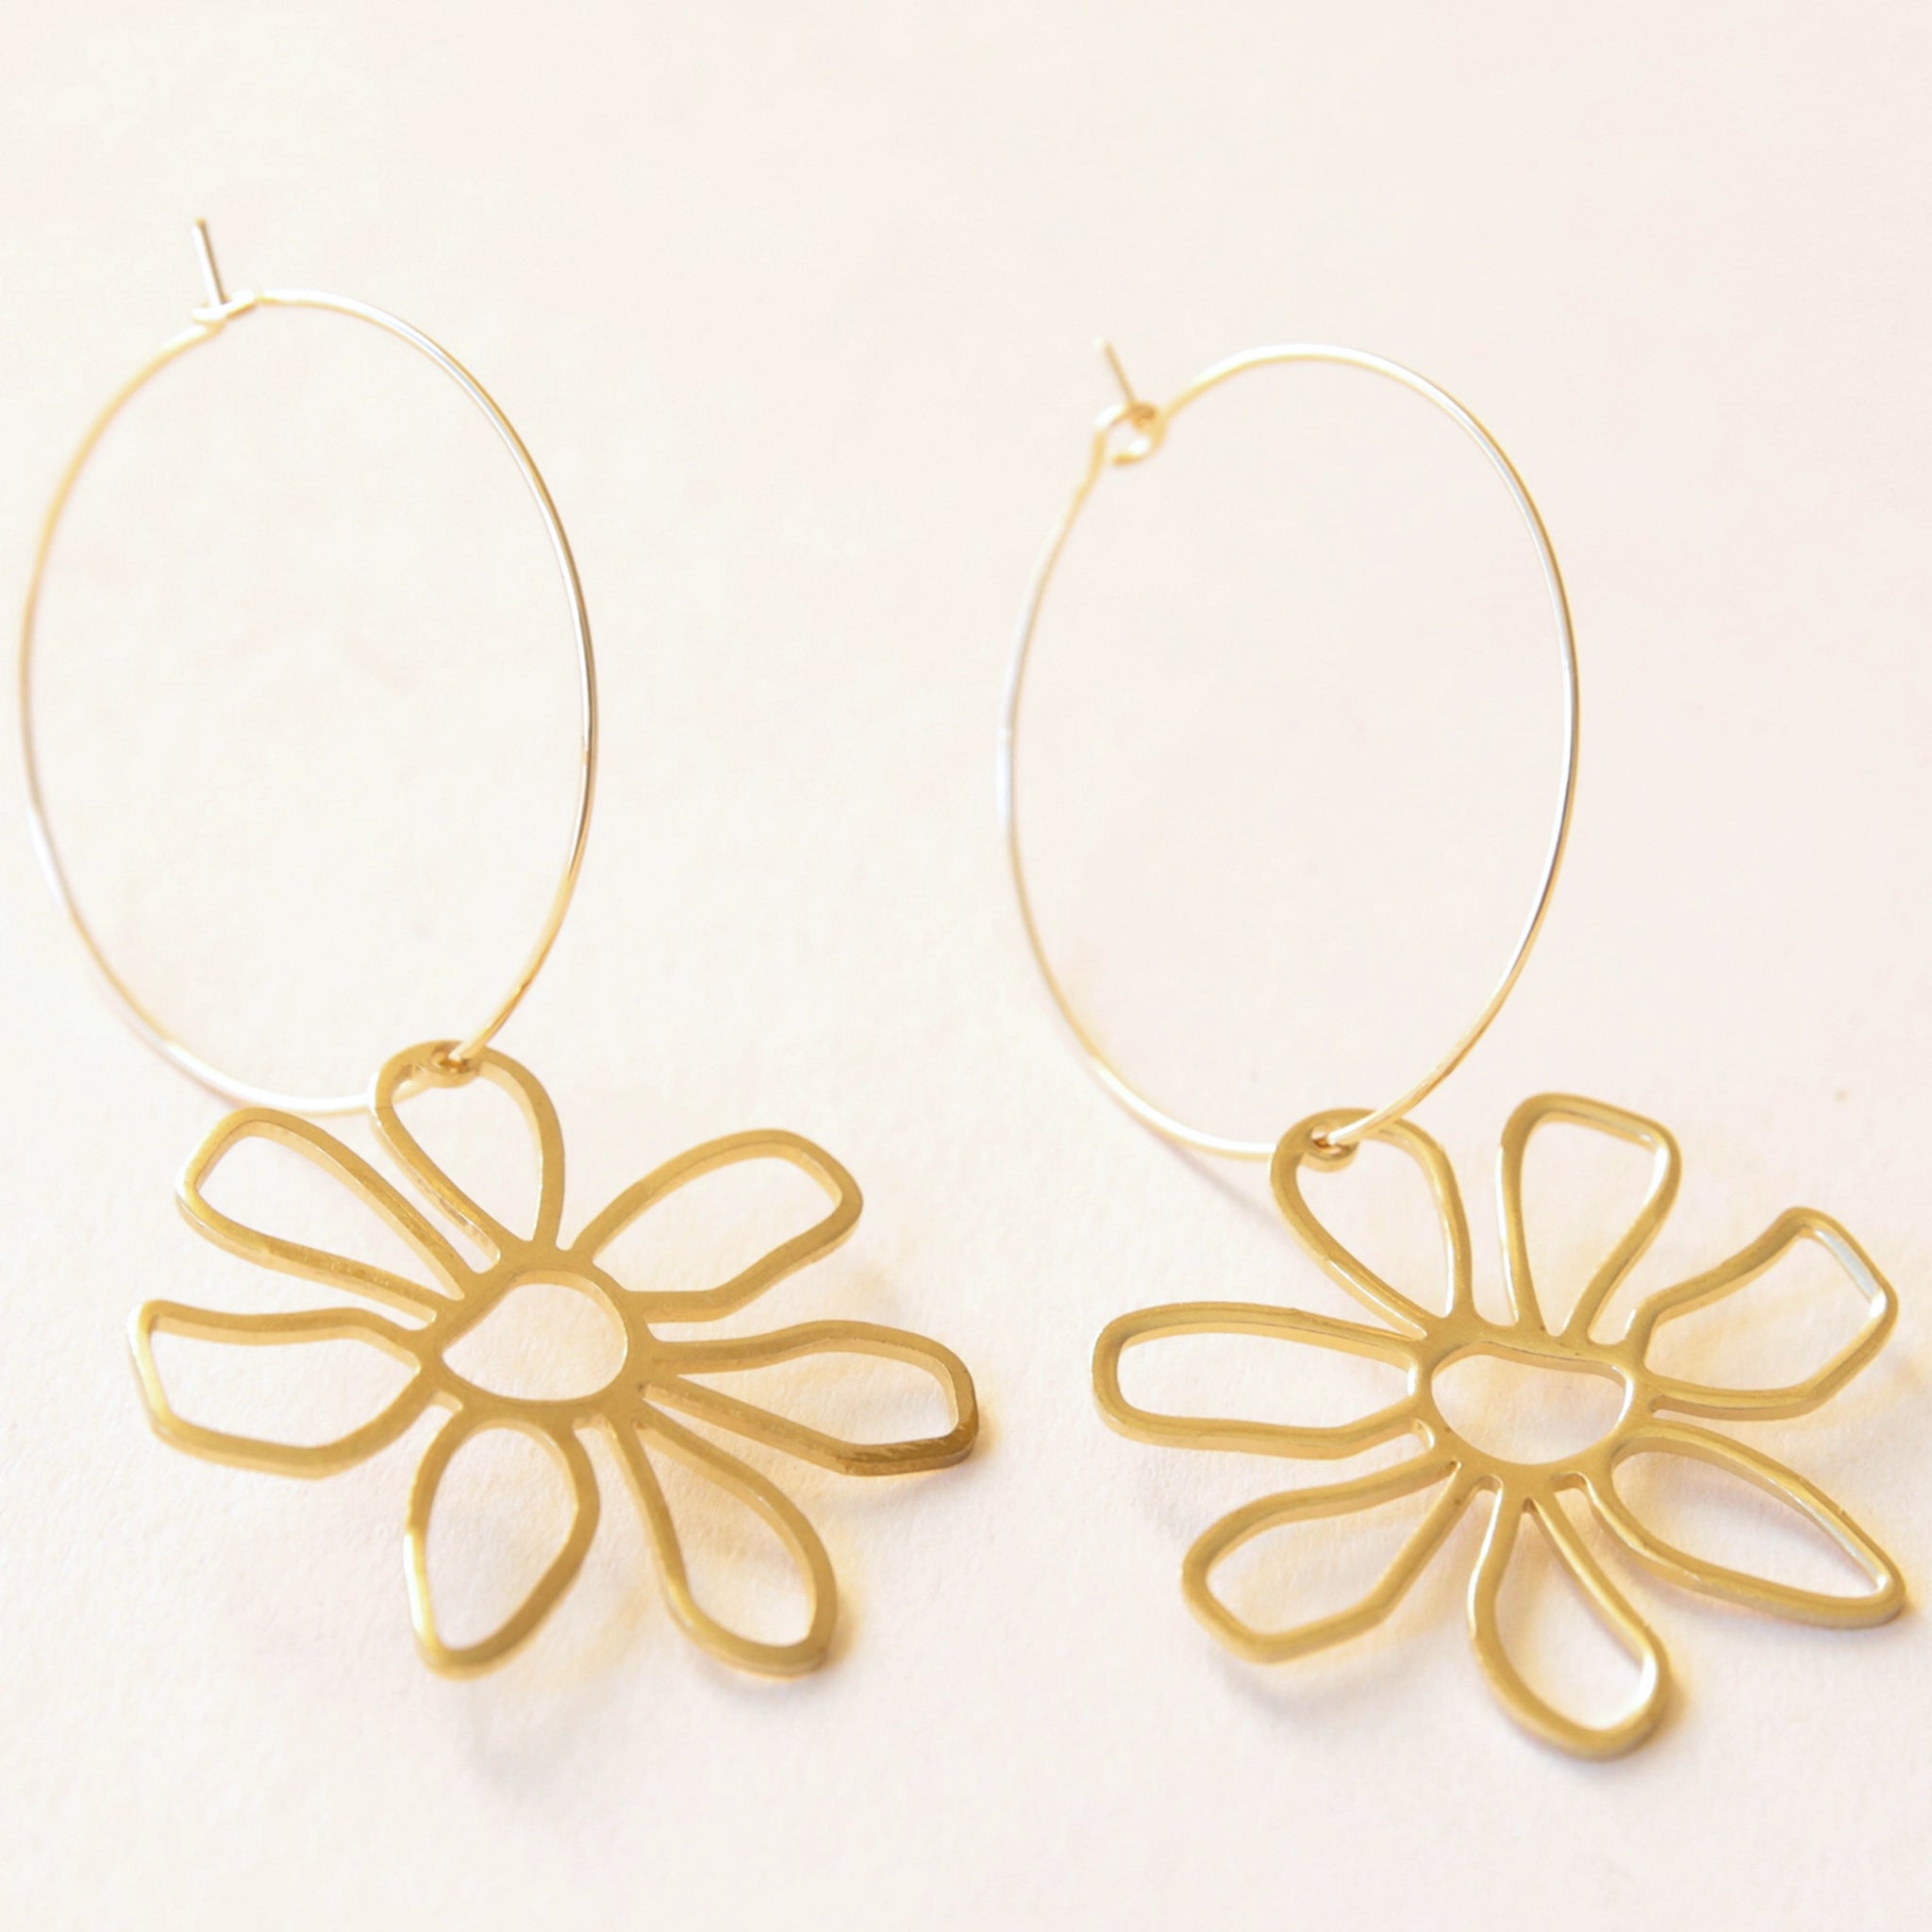 A thin gold hoop earring with a line flower charm.